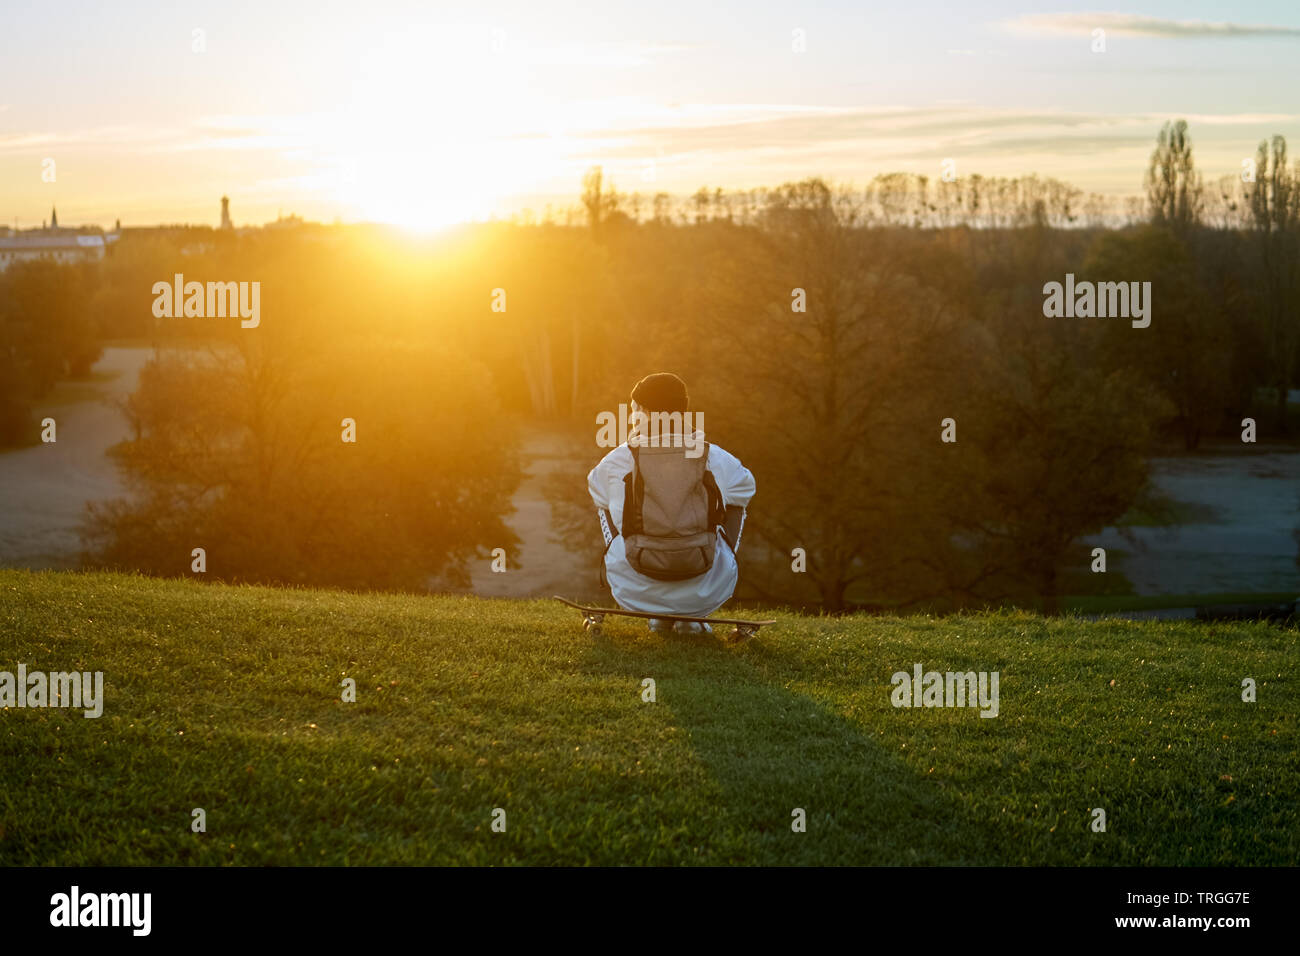 This lifestyle image shows a young man sitting on his skateboard. The scene is lit by the warm light of the setting sun. Stock Photo